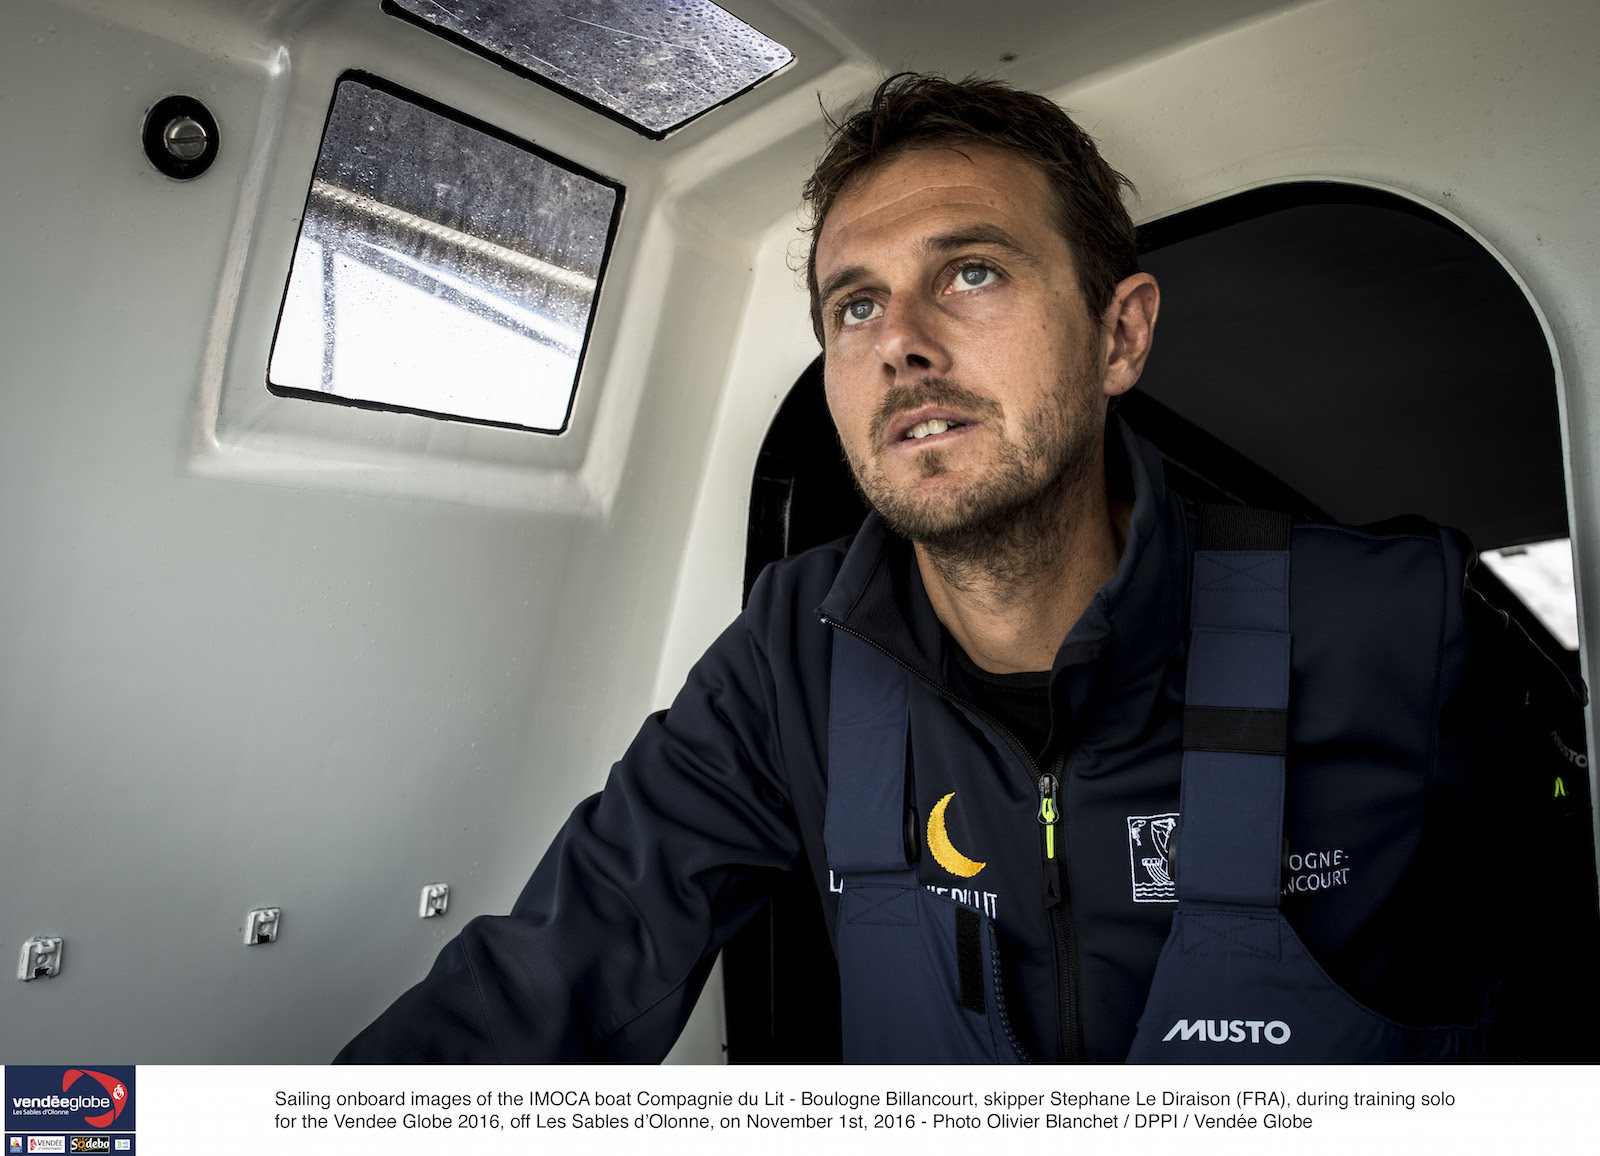 Sailing on board images of the IMOCA boat Compagnie du Lit - Boulogne Billancourt skipper Stephane Le Diraison (FRA), during training solo for the Vendee Globe 2016, off Les Sables of Olonne, on November 1st 2016 - Photo olivier Blanchet / DPPI / Vendee Globe